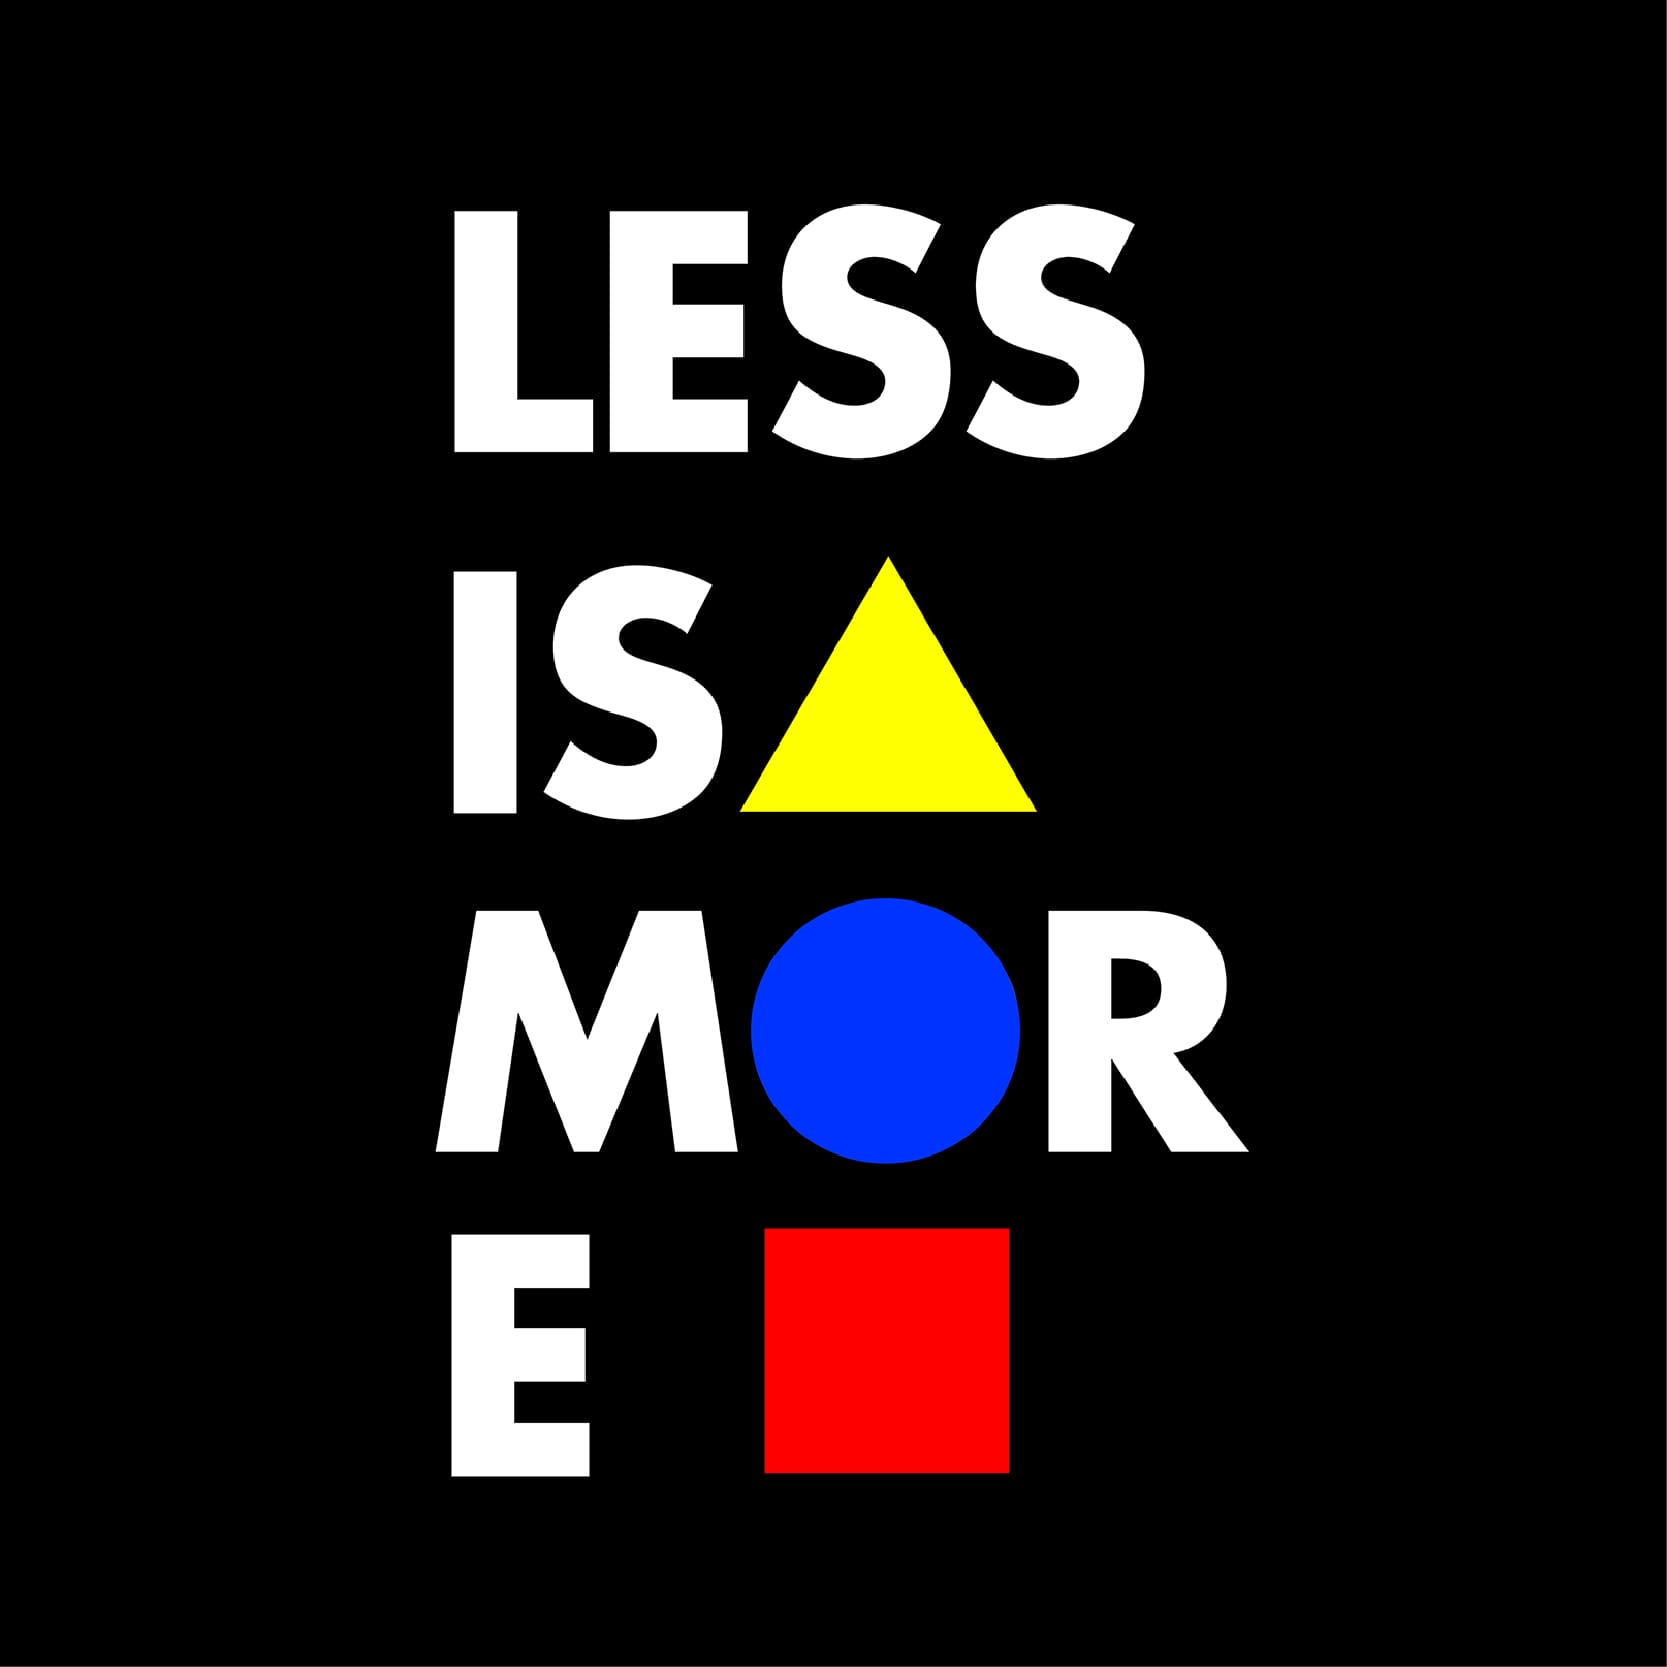 Less is More!